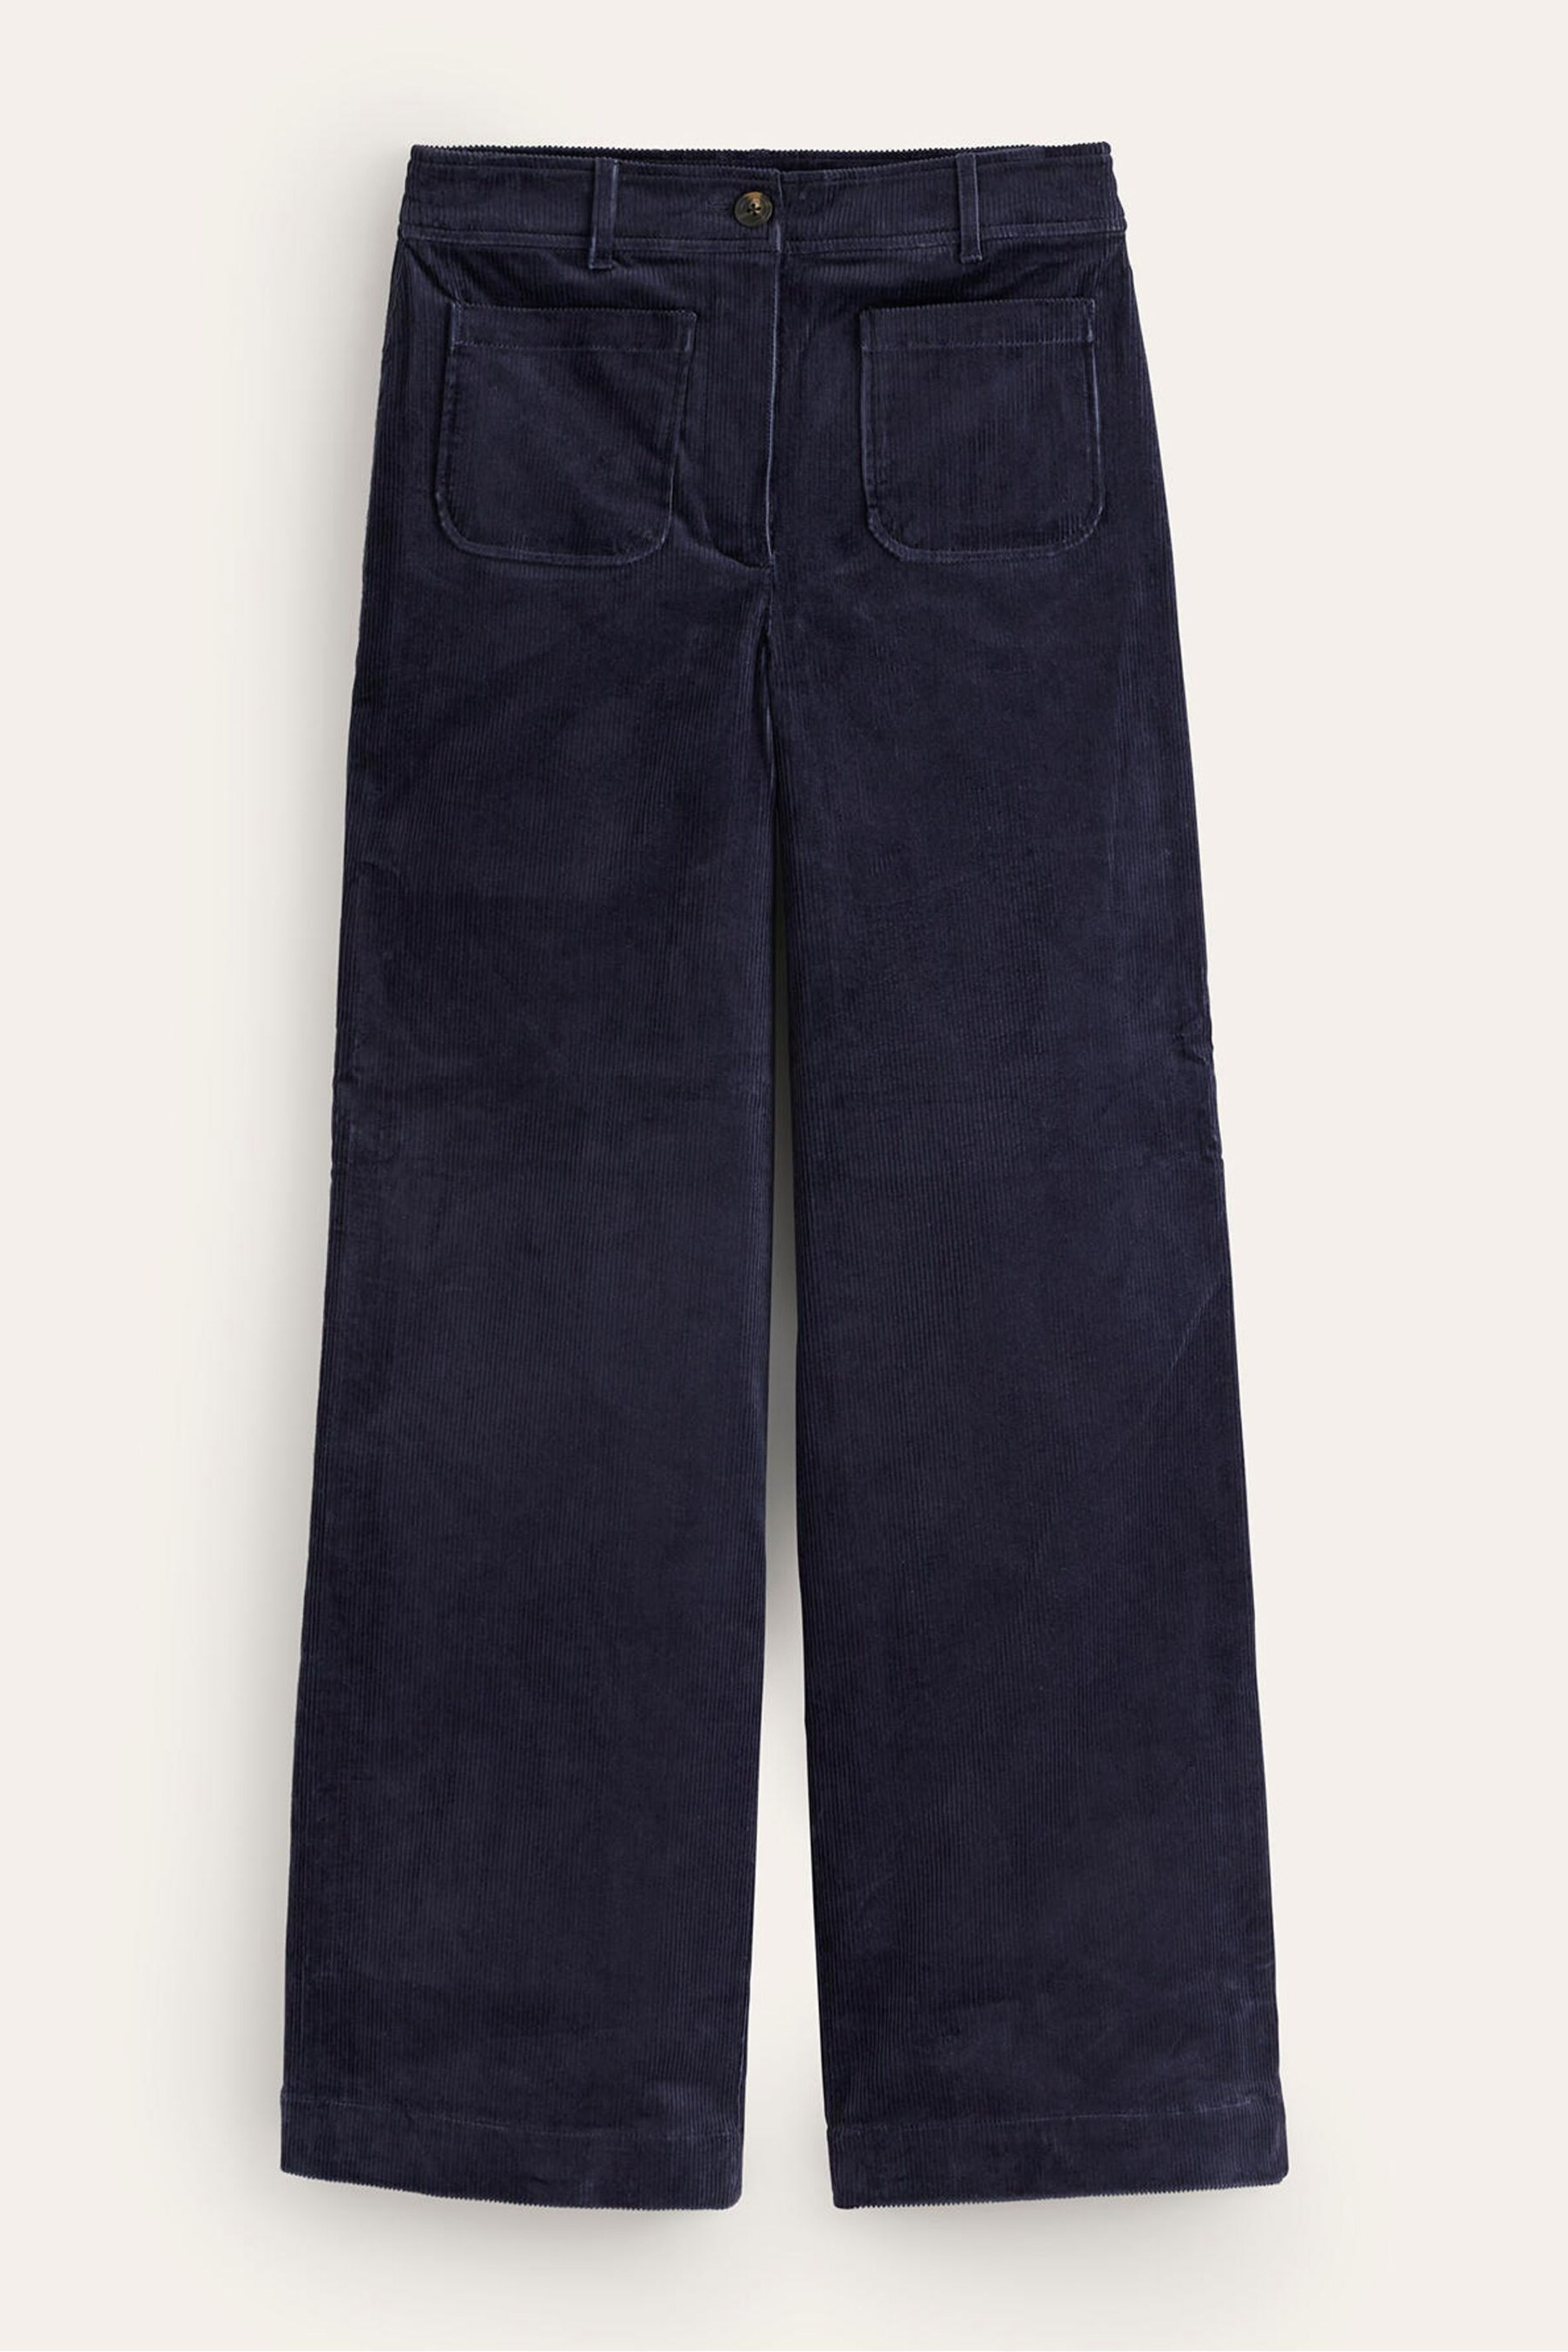 Boden Blue Westbourne Corduroy Trousers - Image 5 of 5